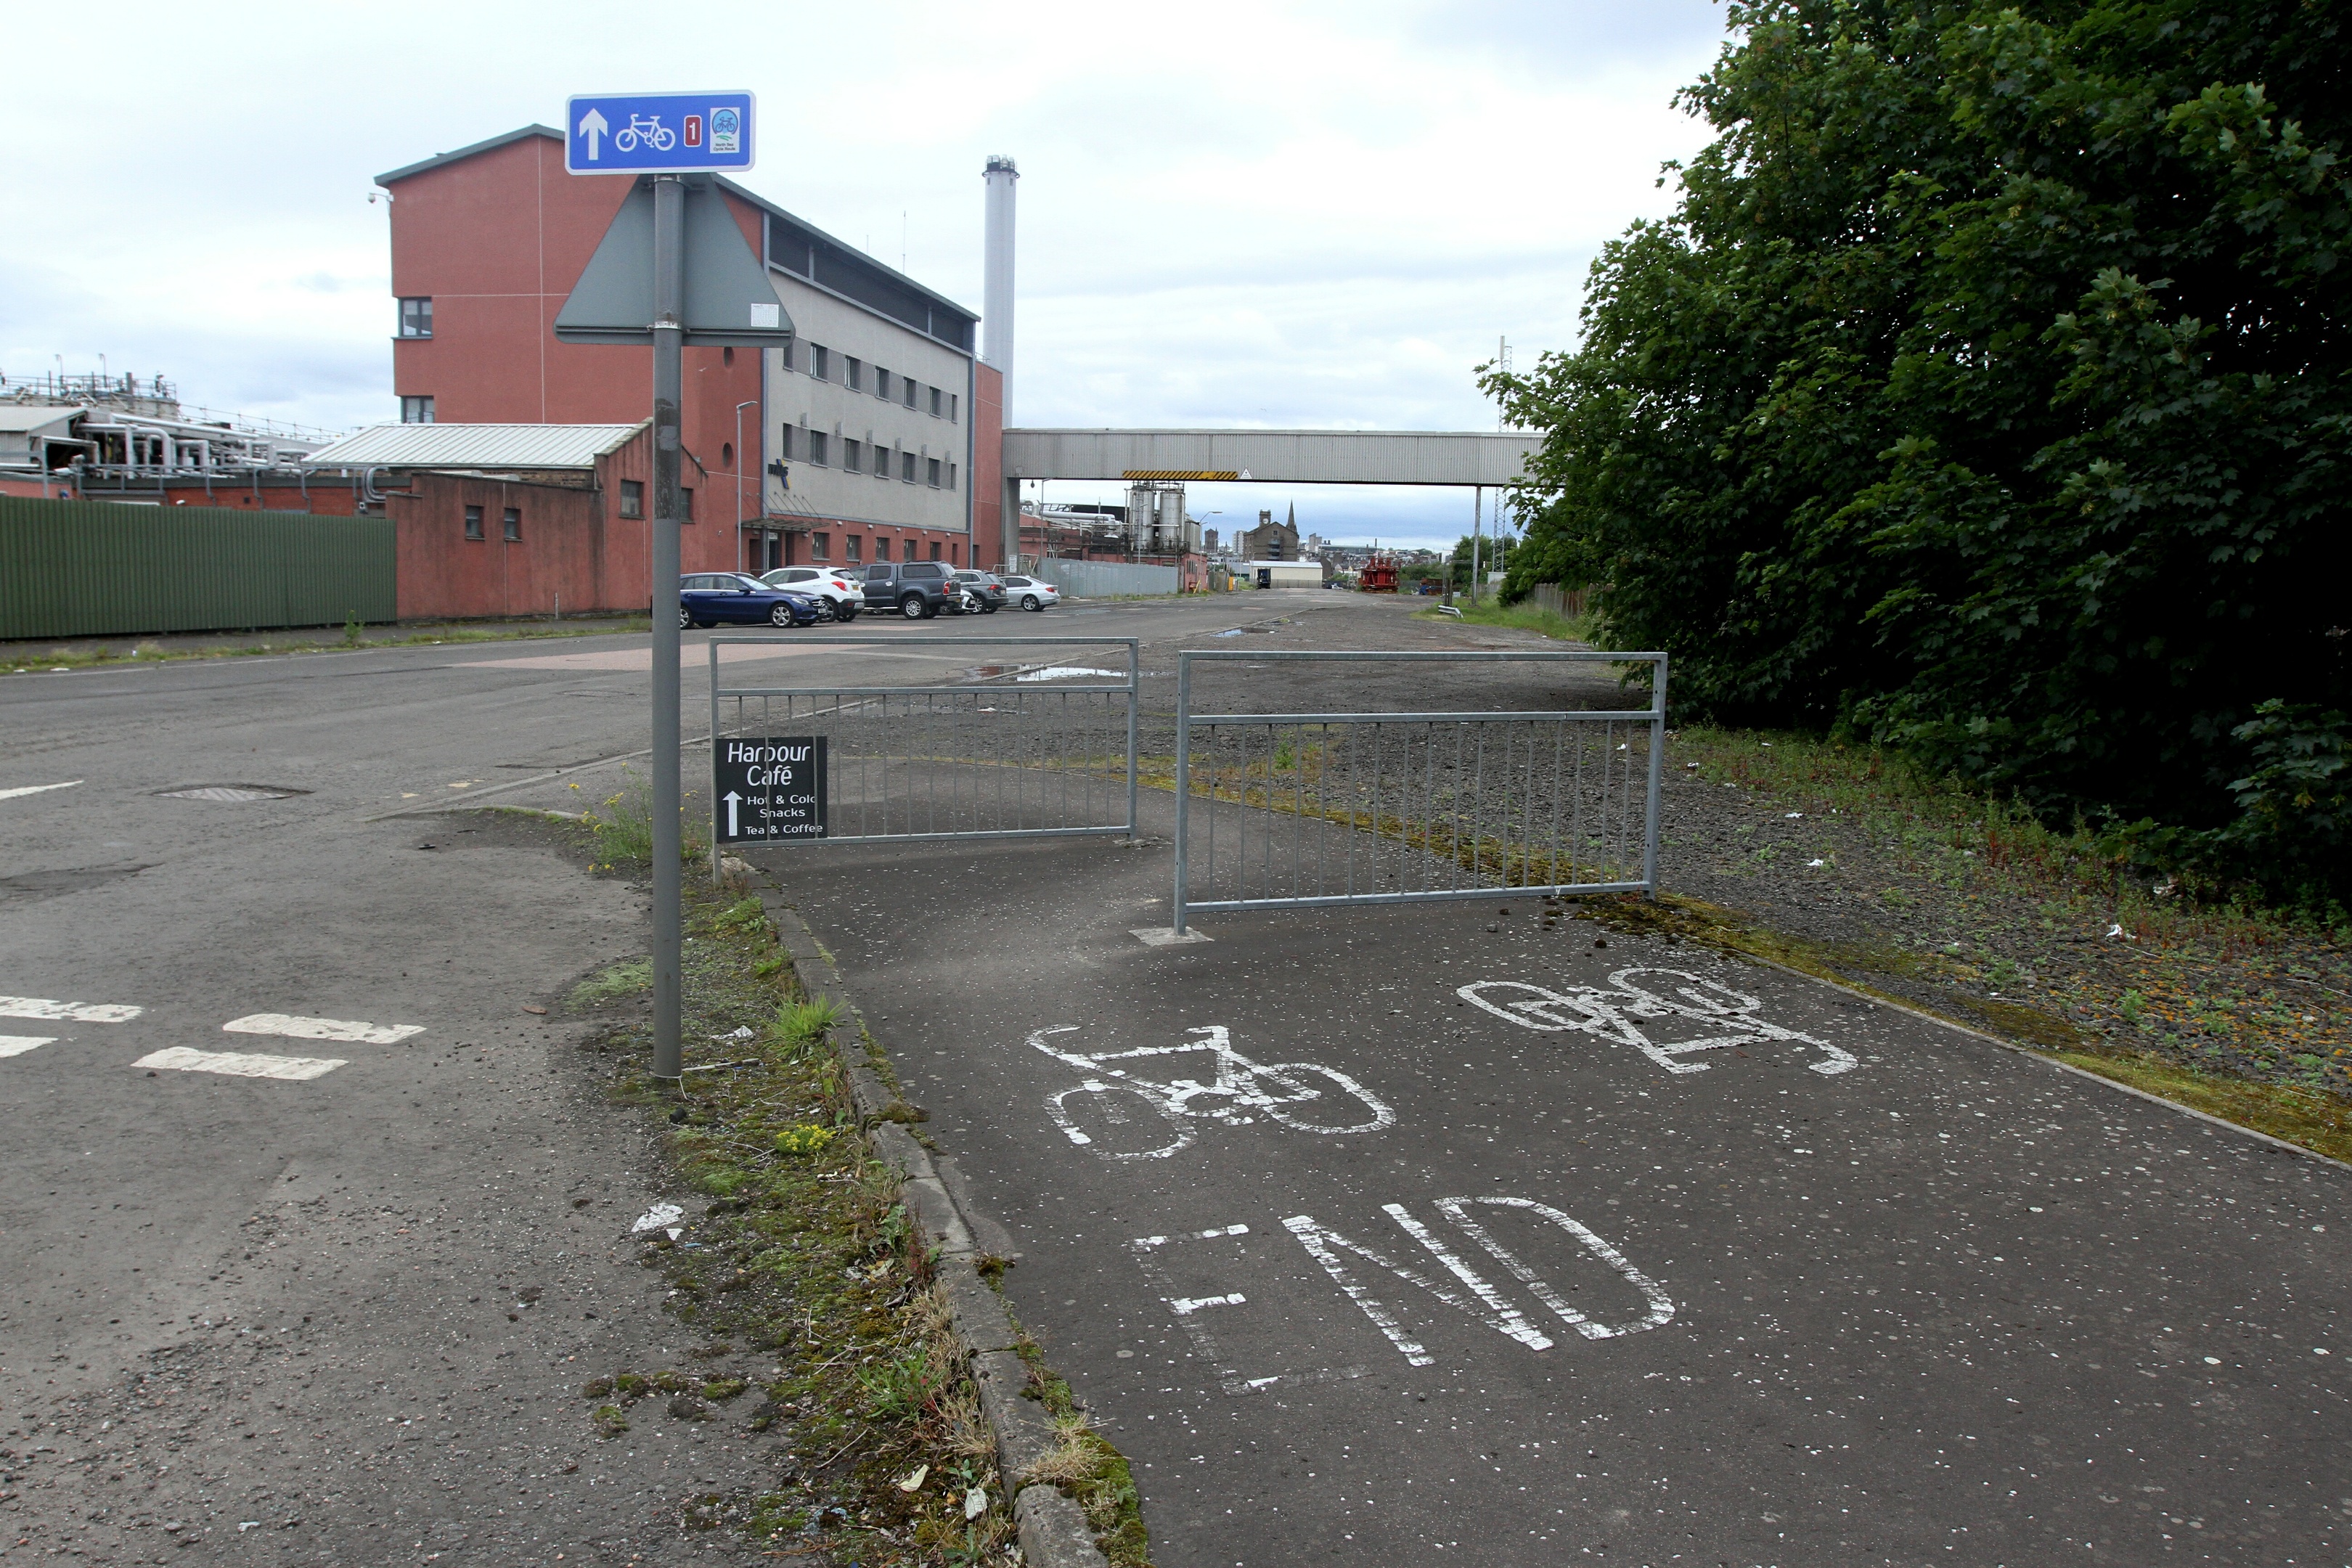 The docks cycle path is set to be resurfaced and opened up to pedestrians.